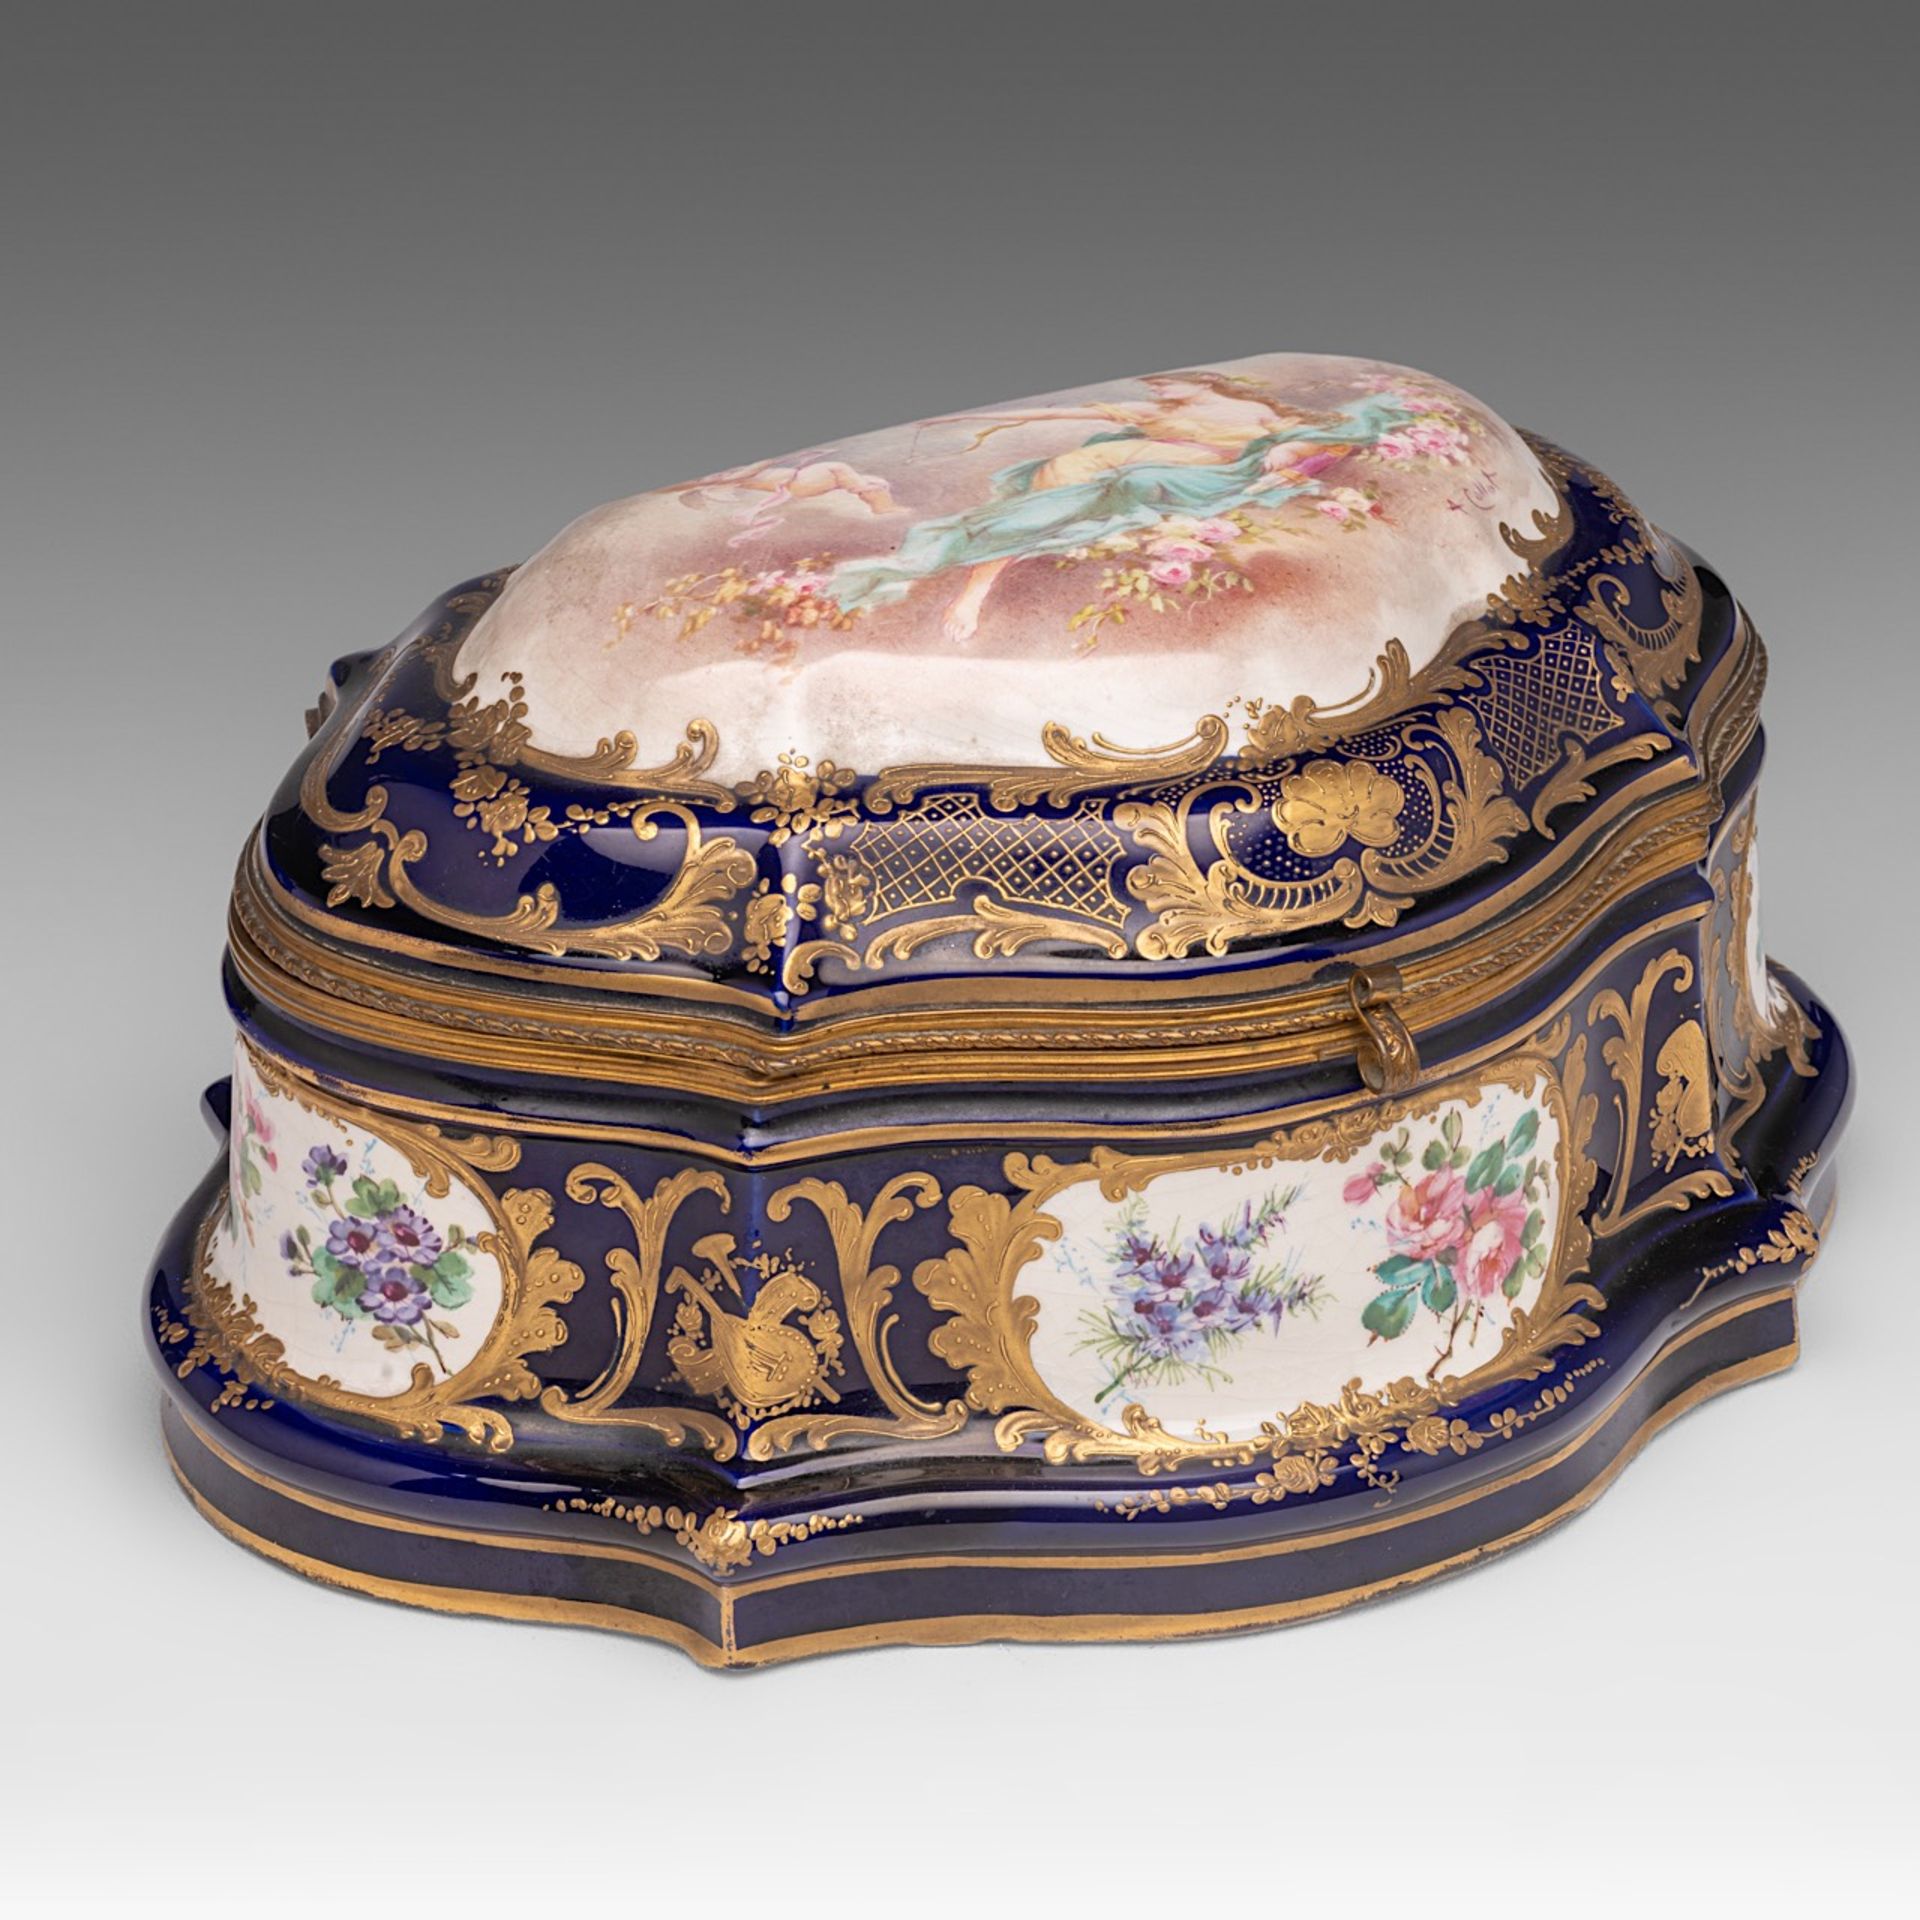 A fine bleu royale ground Sevres box with gilt decoration and hand-painted roundels, signed A. Collo